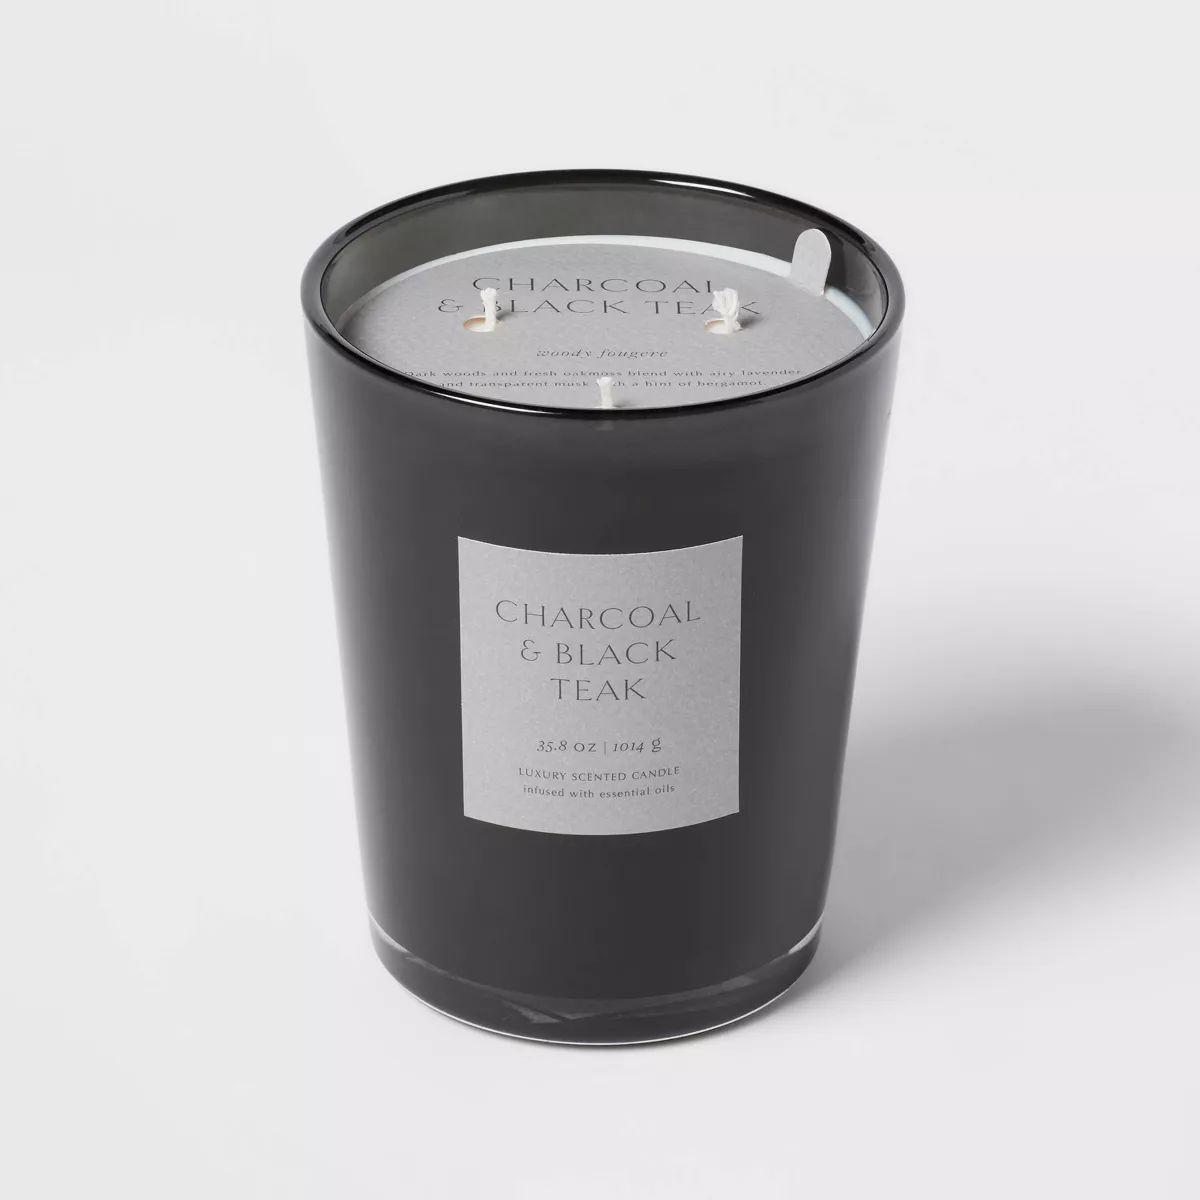 Colored Vase Glass with Dustcover & Black Teak Candle Black - Threshold™ | Target